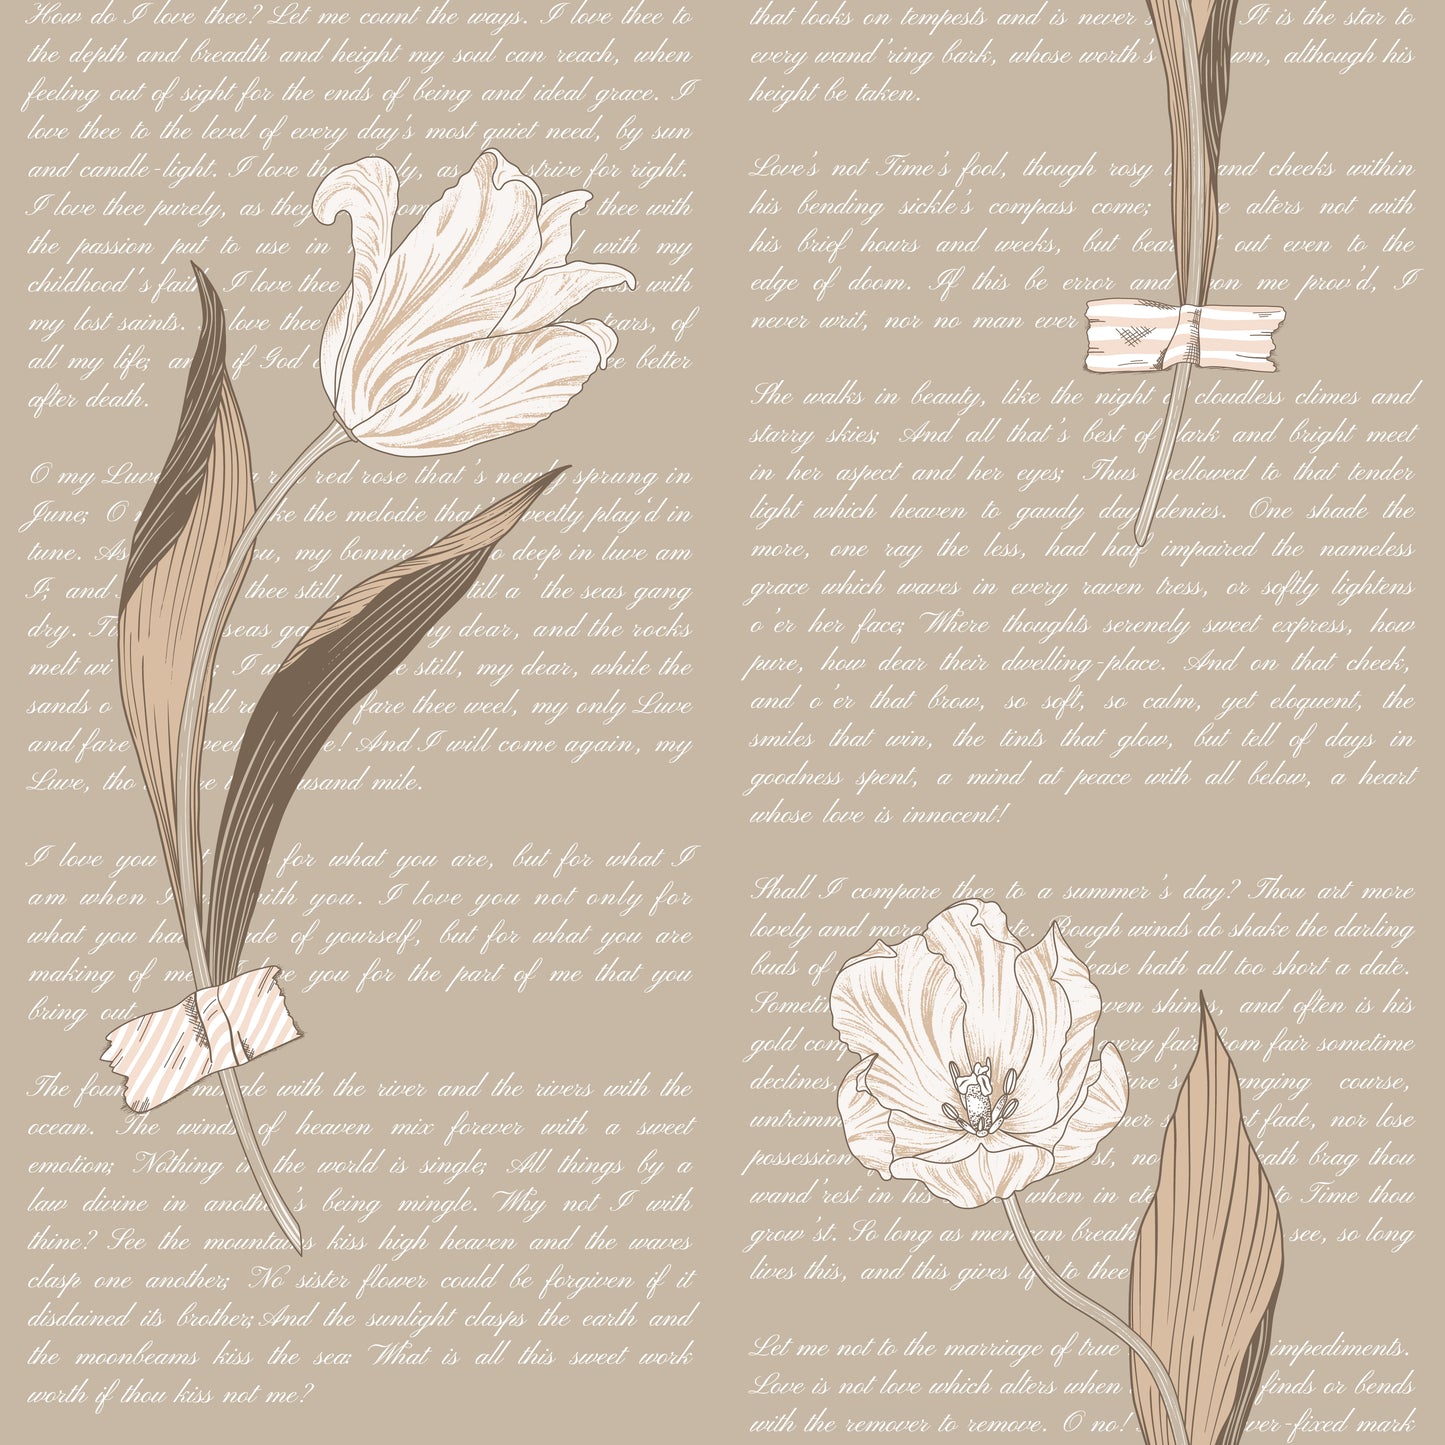 Whimsical cream and brown tulip design on script print beige background easy to install and remove peel and stick custom wallpaper available in different lengths/sizes locally created and printed in Canada wallpaper. Washable, durable, commercial grade, removable and waterproof.